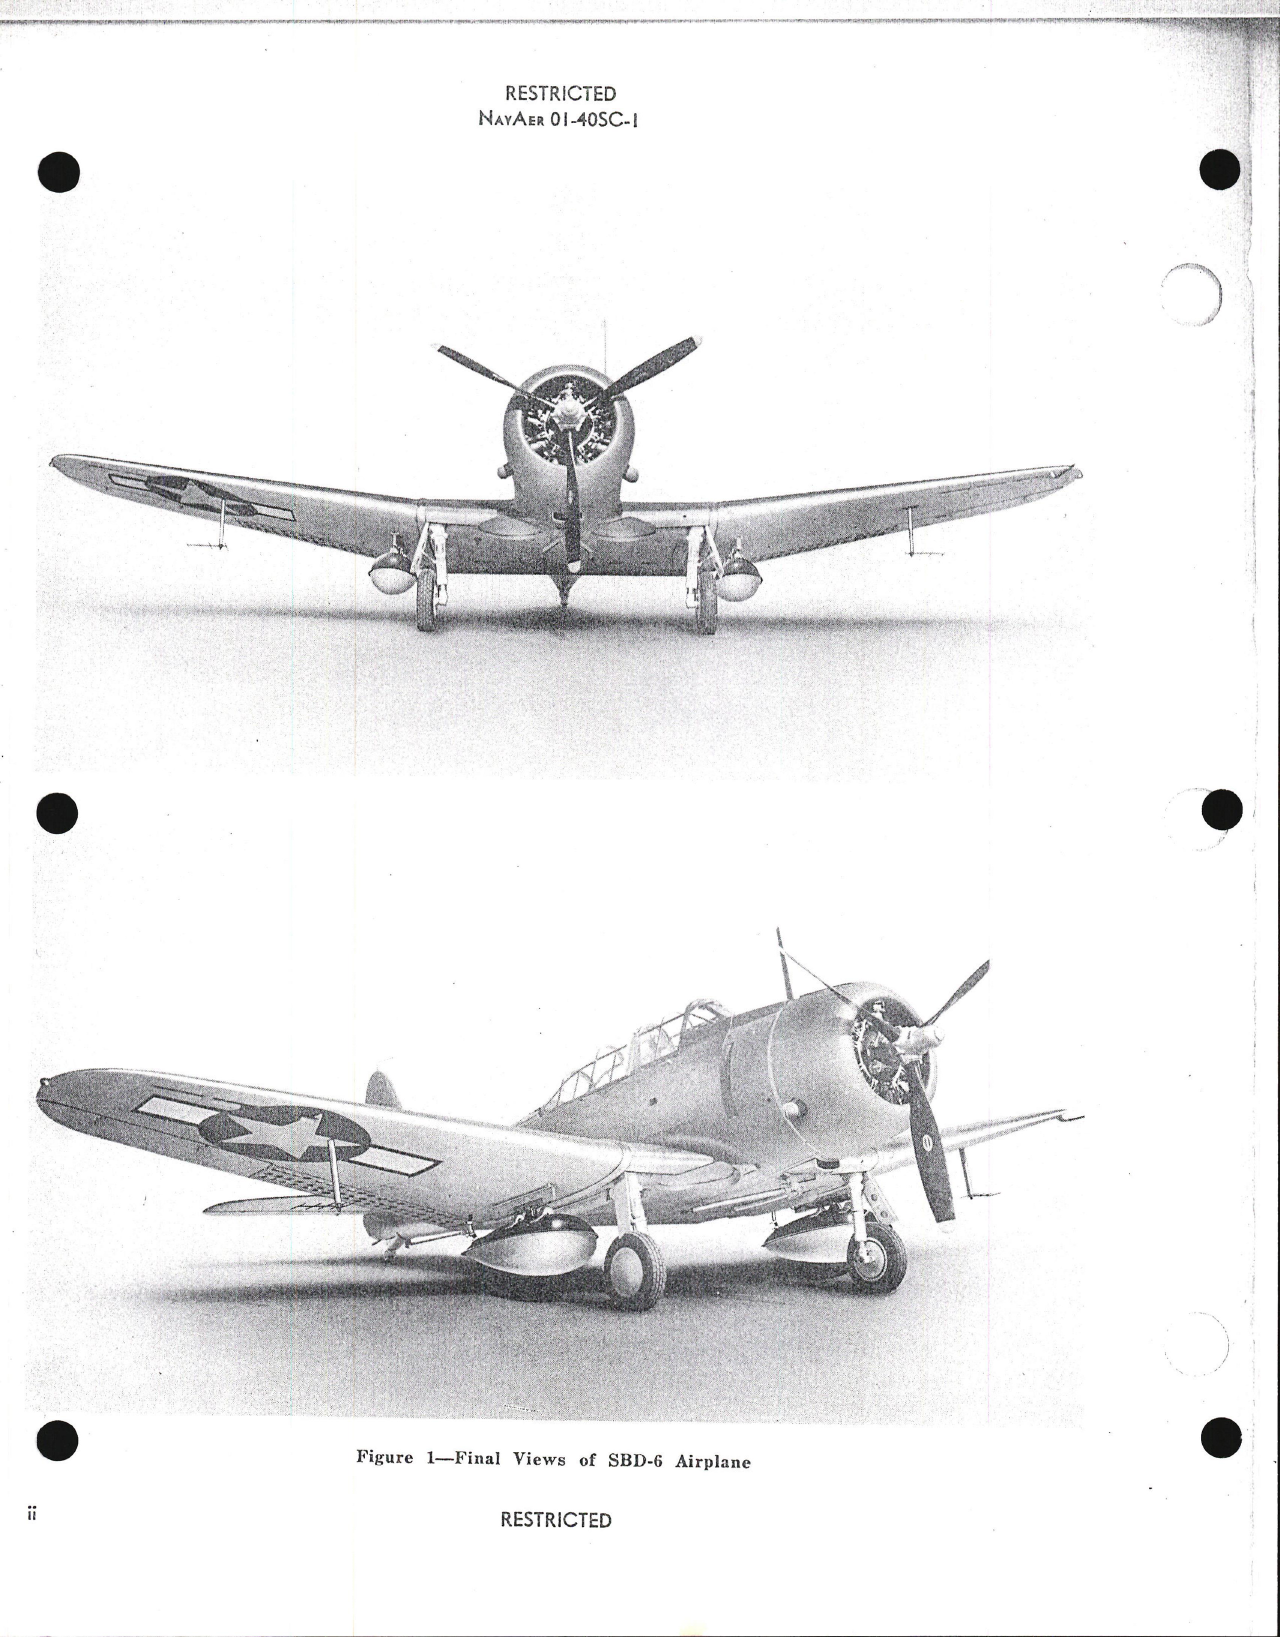 Sample page 5 from AirCorps Library document: Pilot's Flight Instructions for Navy Model SBD-6 